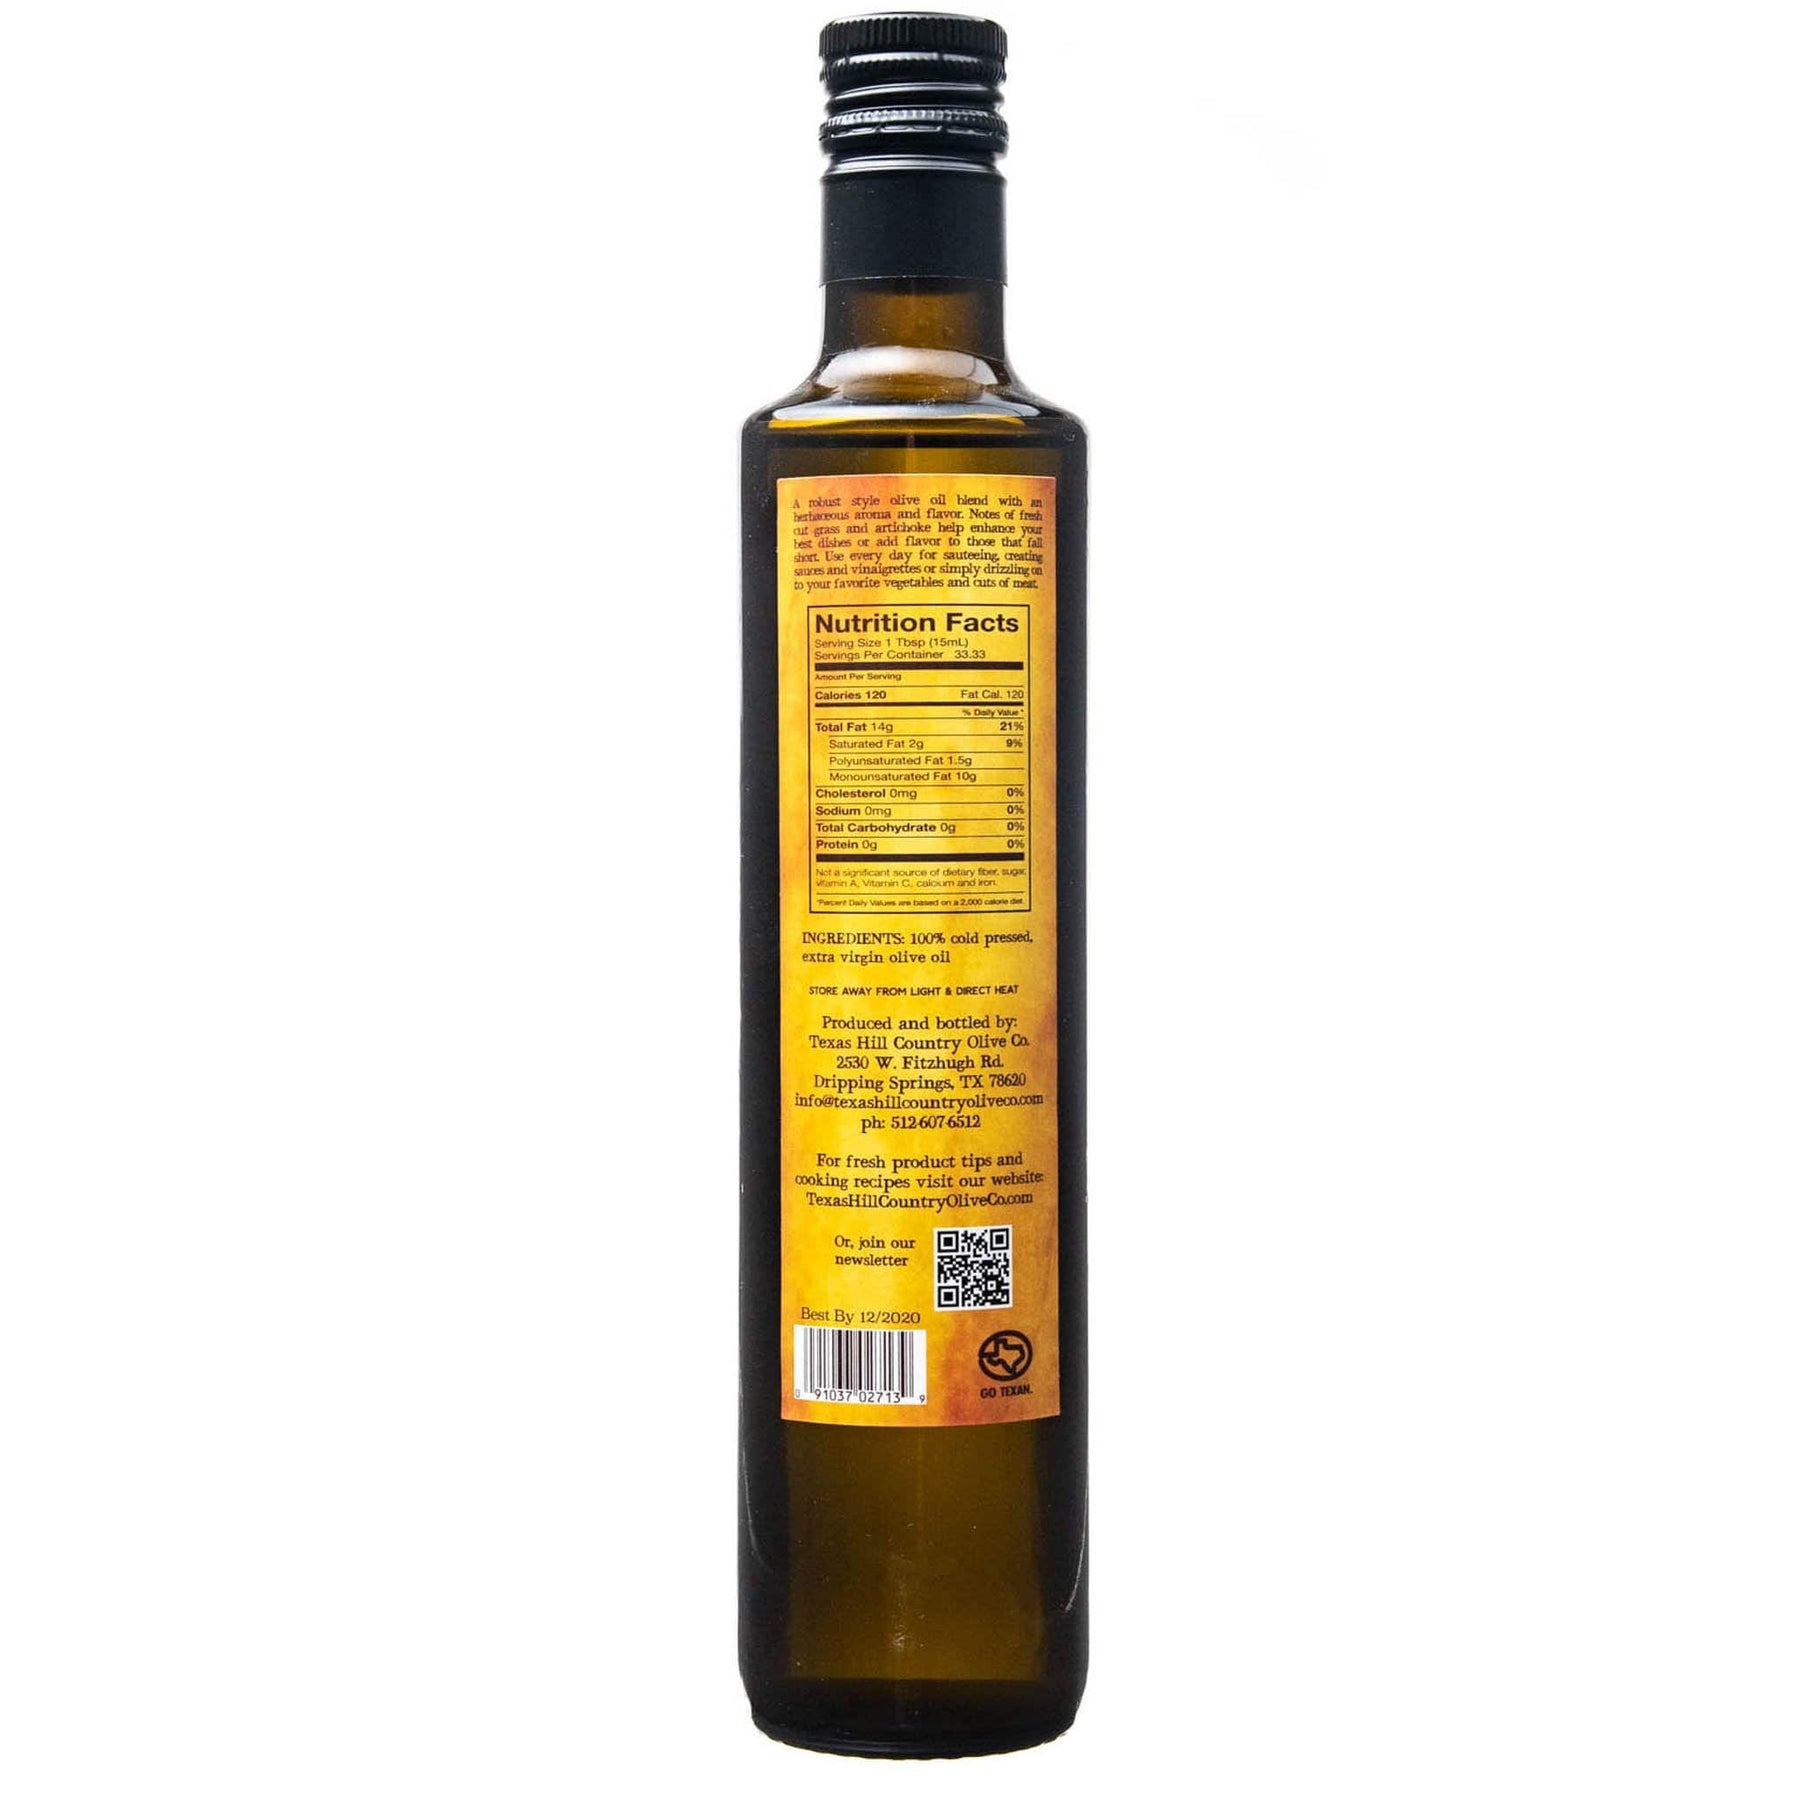 Texas Miller's Blend Extra Virgin Olive Oil - Texas Hill Country Olive Co.